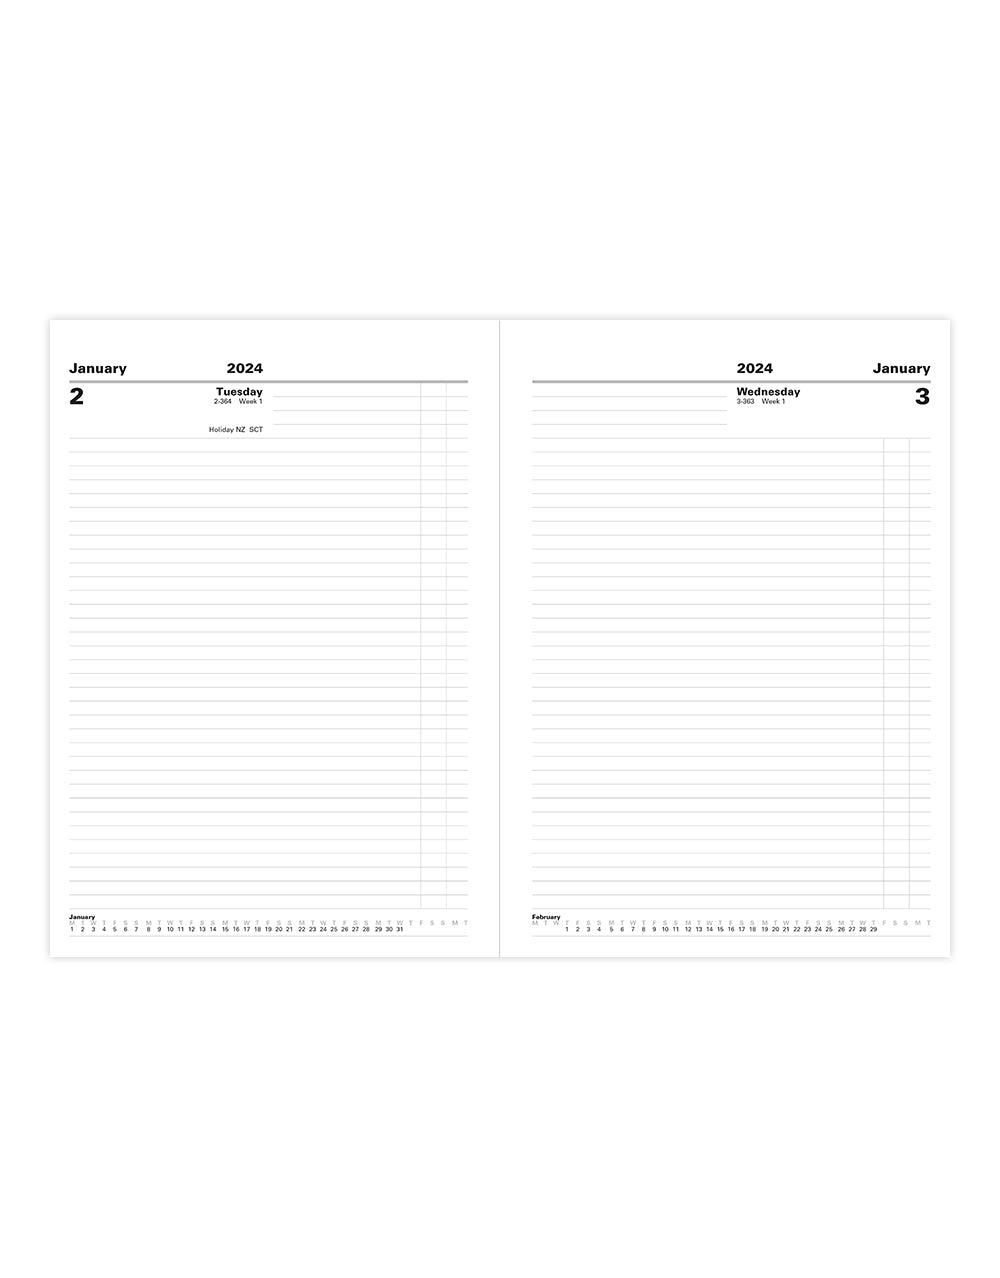 Standard A4 Day to a Page Diary 2024 - English@colour_black